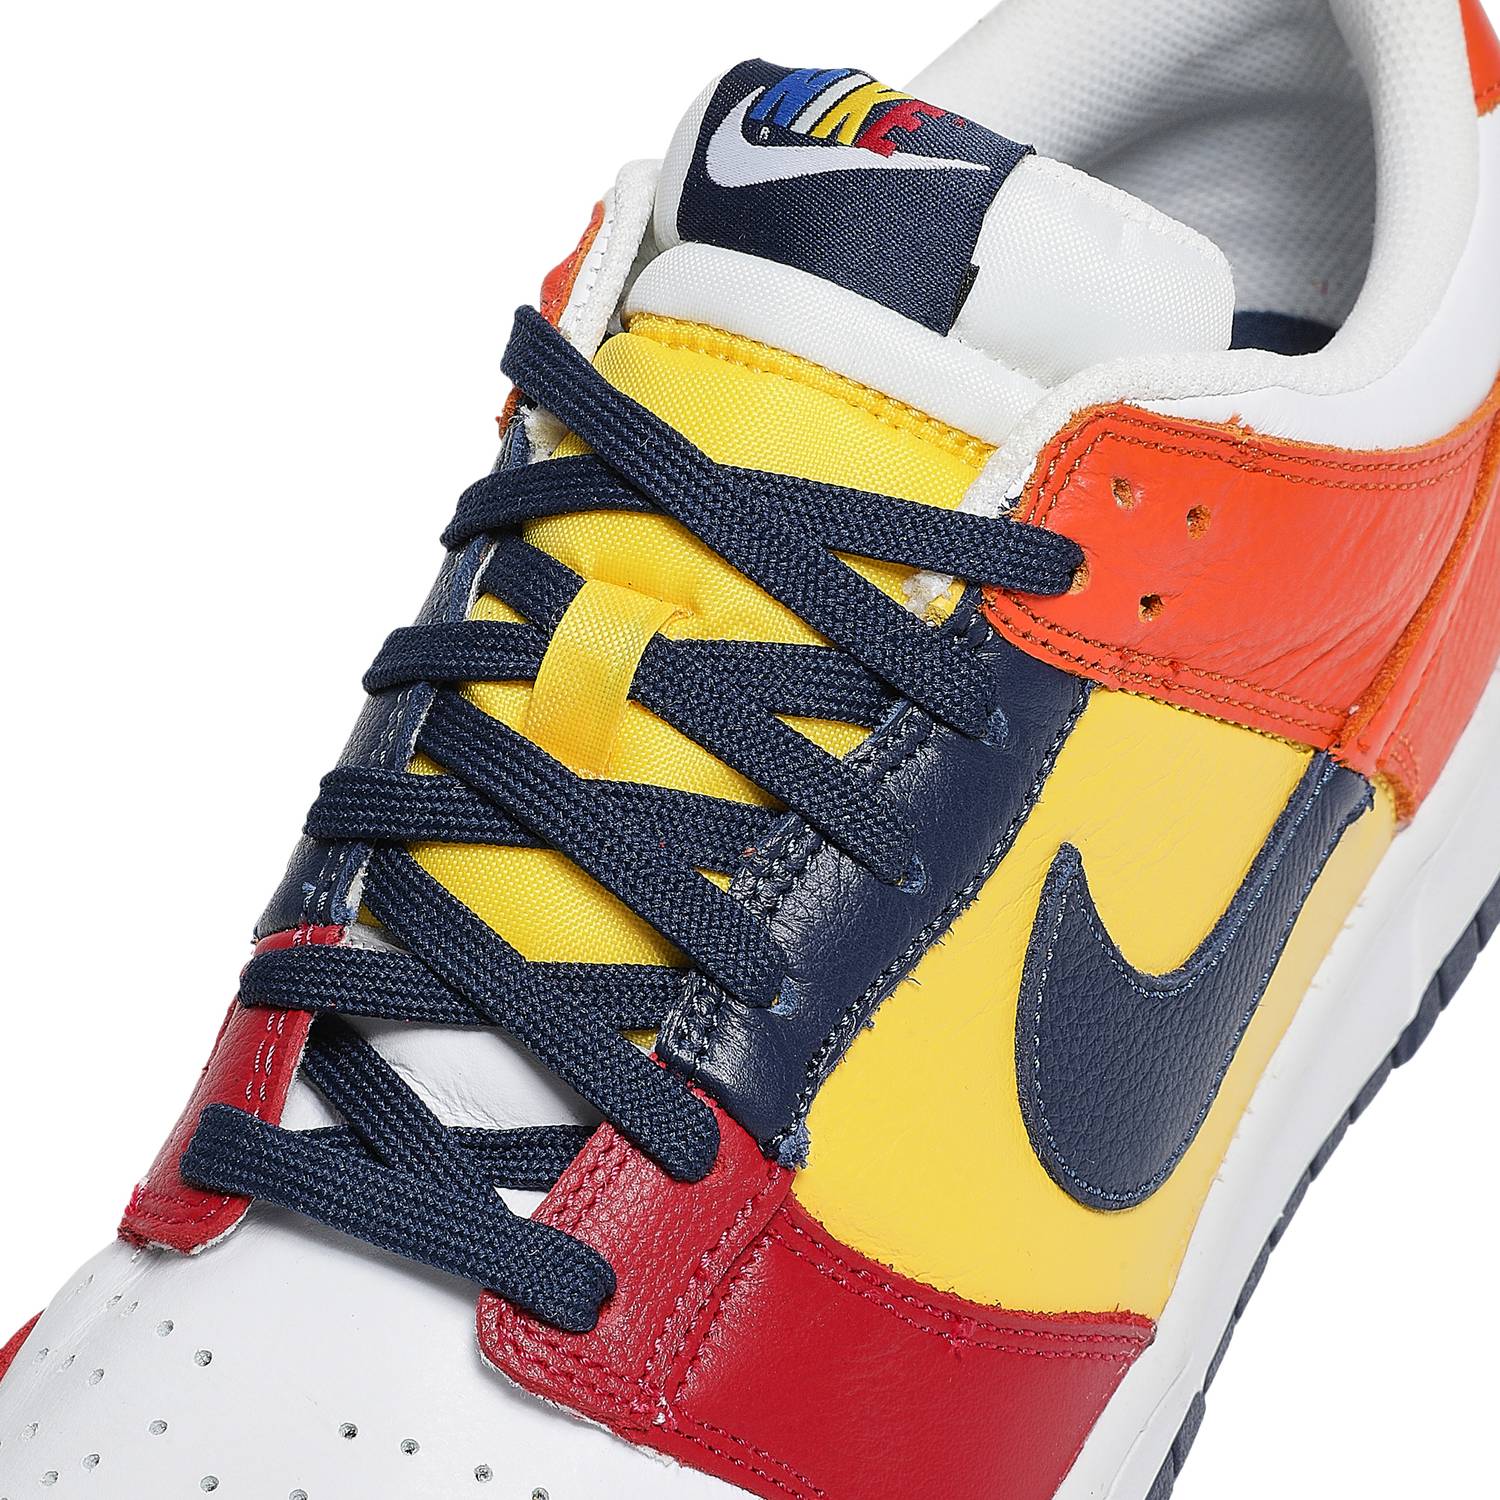 Dunk Low Japan QS 'What The' - Nike - AA4414 400 | GOAT